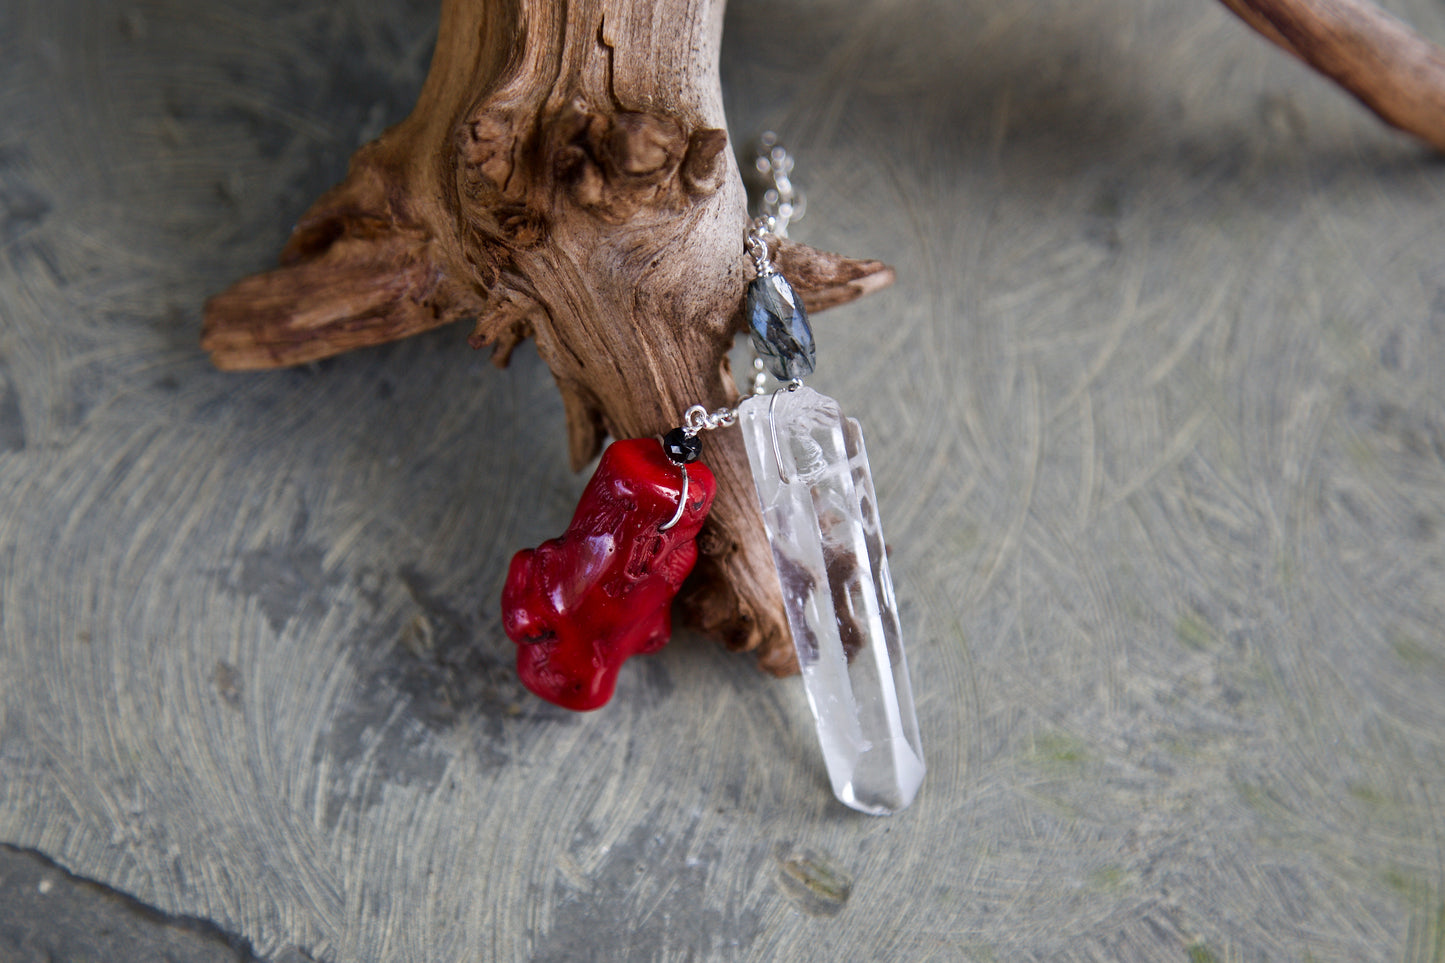 Red Coral, Onyx, Tourmalinated Quartz, Single Termination Clear Quartz Shovel Crystal, and Sterling Silver Double-sided Pendulum